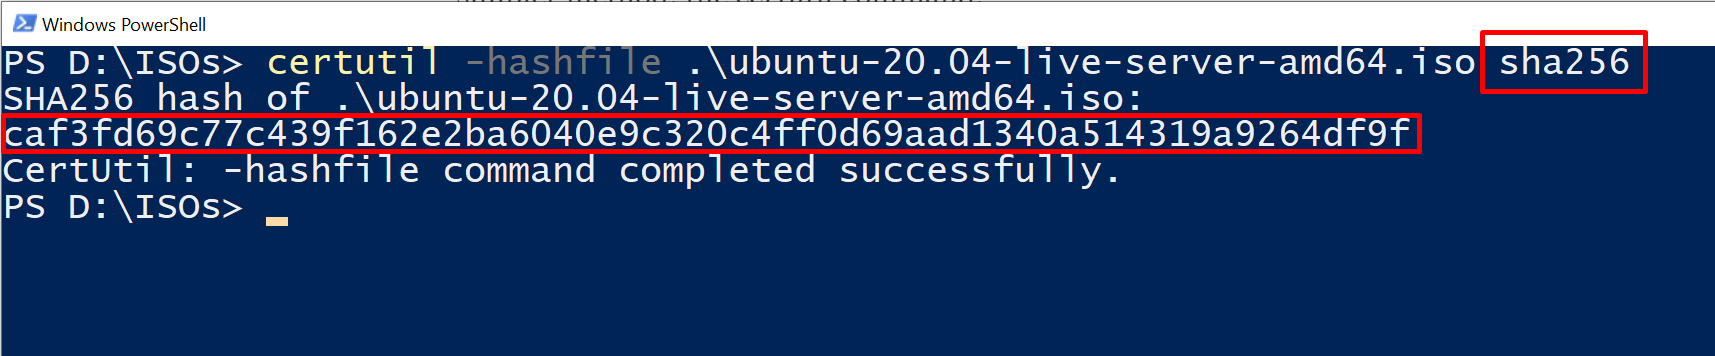 Screenshot of powershell window showing a calculated hash value for Ubuntu Server, matching that of the value on the official Ubuntu website.